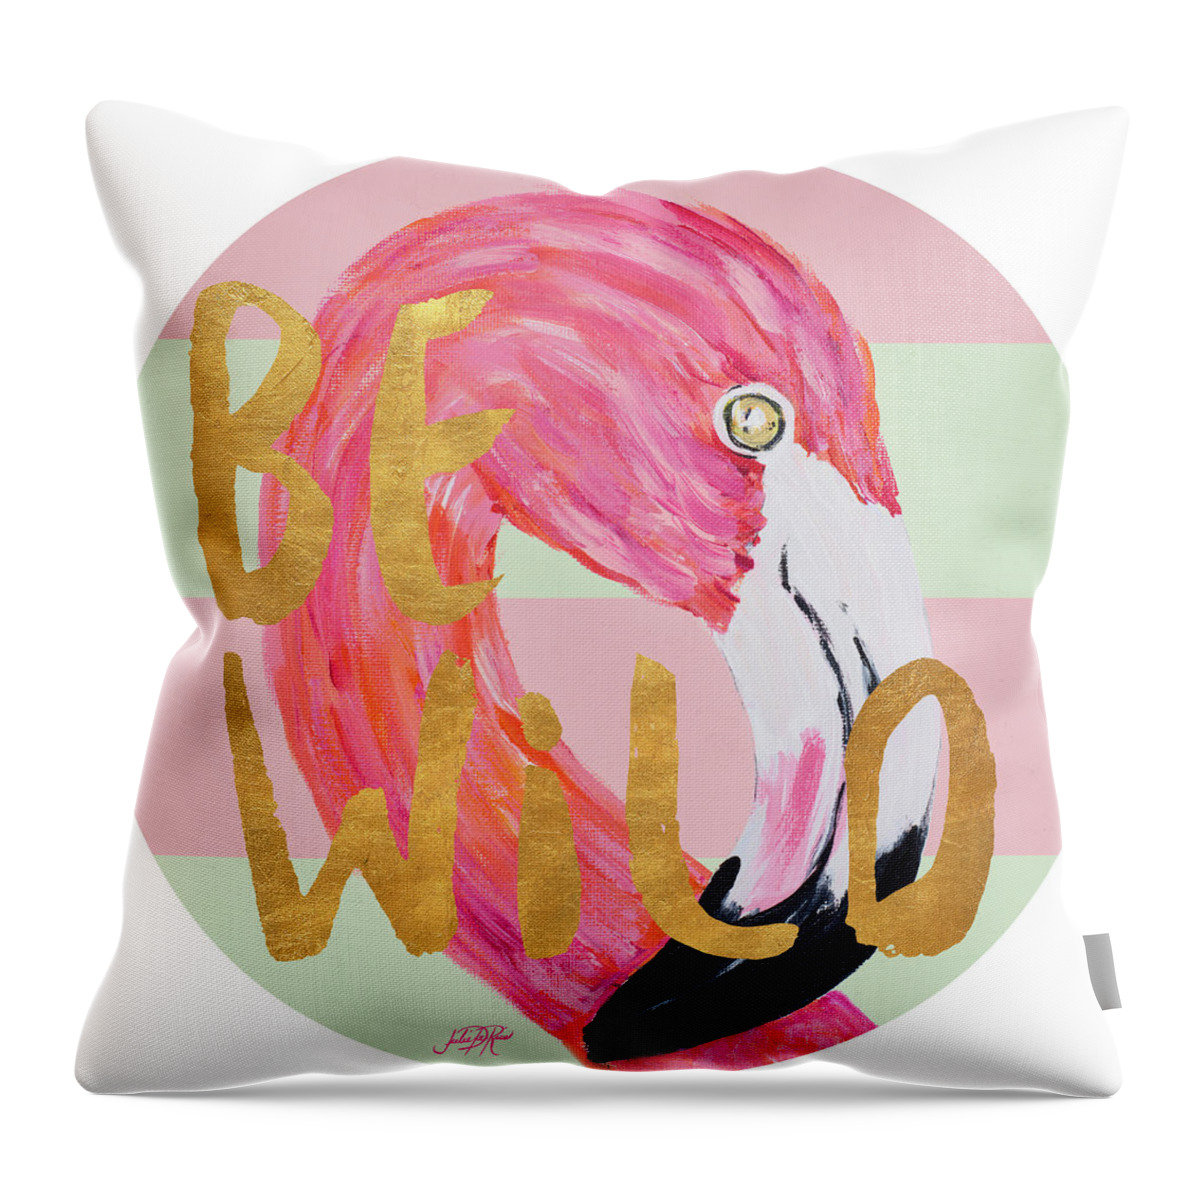 Flamingo Throw Pillow featuring the painting Flamingo On Stripes Round by South Social D